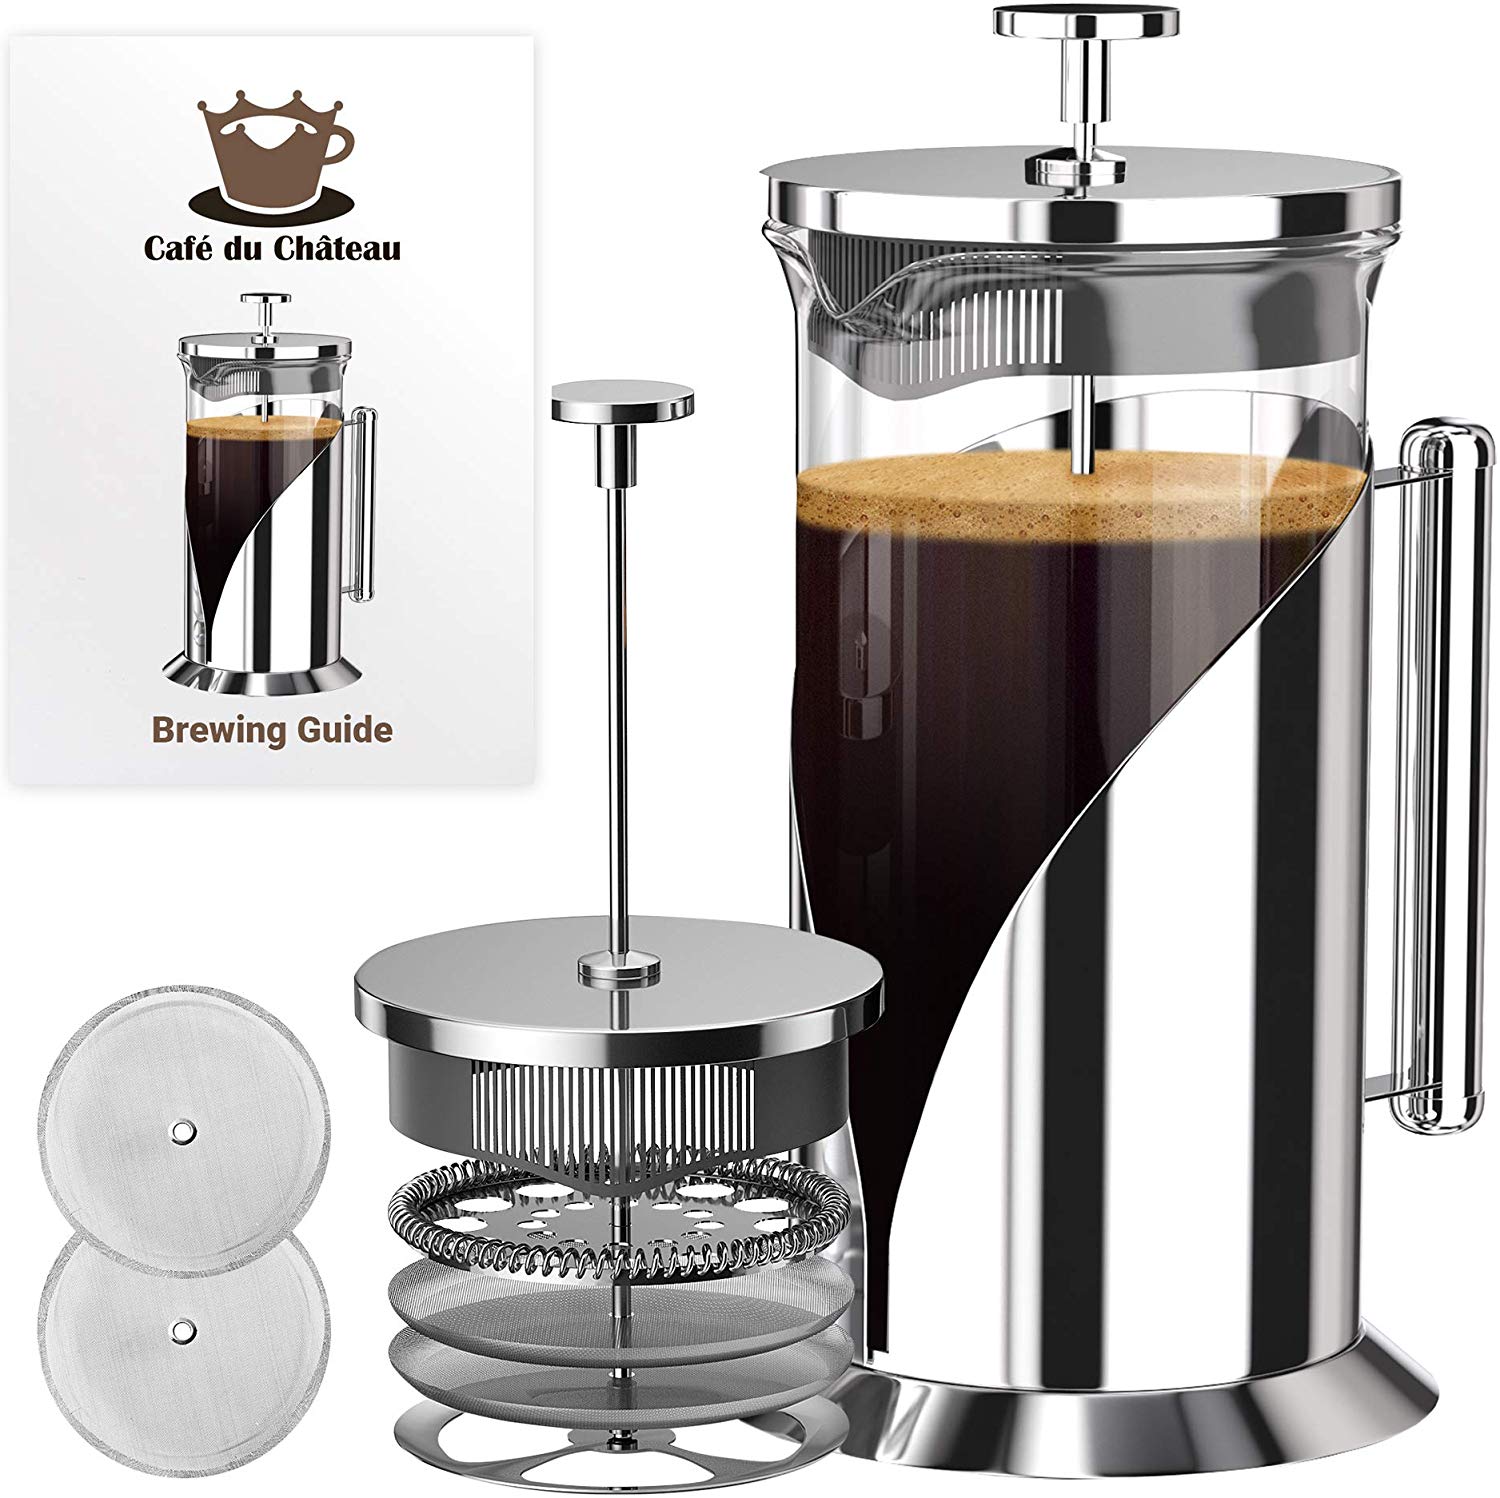 ,EAXCK 304 Stainless Steel Coffee Press 4 Level Filtration System,Heat Resistant Thickened Borosilicate Glass,Durable Easy Clean,100% BPA Free 2021 Upgrade French Press Coffee Maker 12 oz 